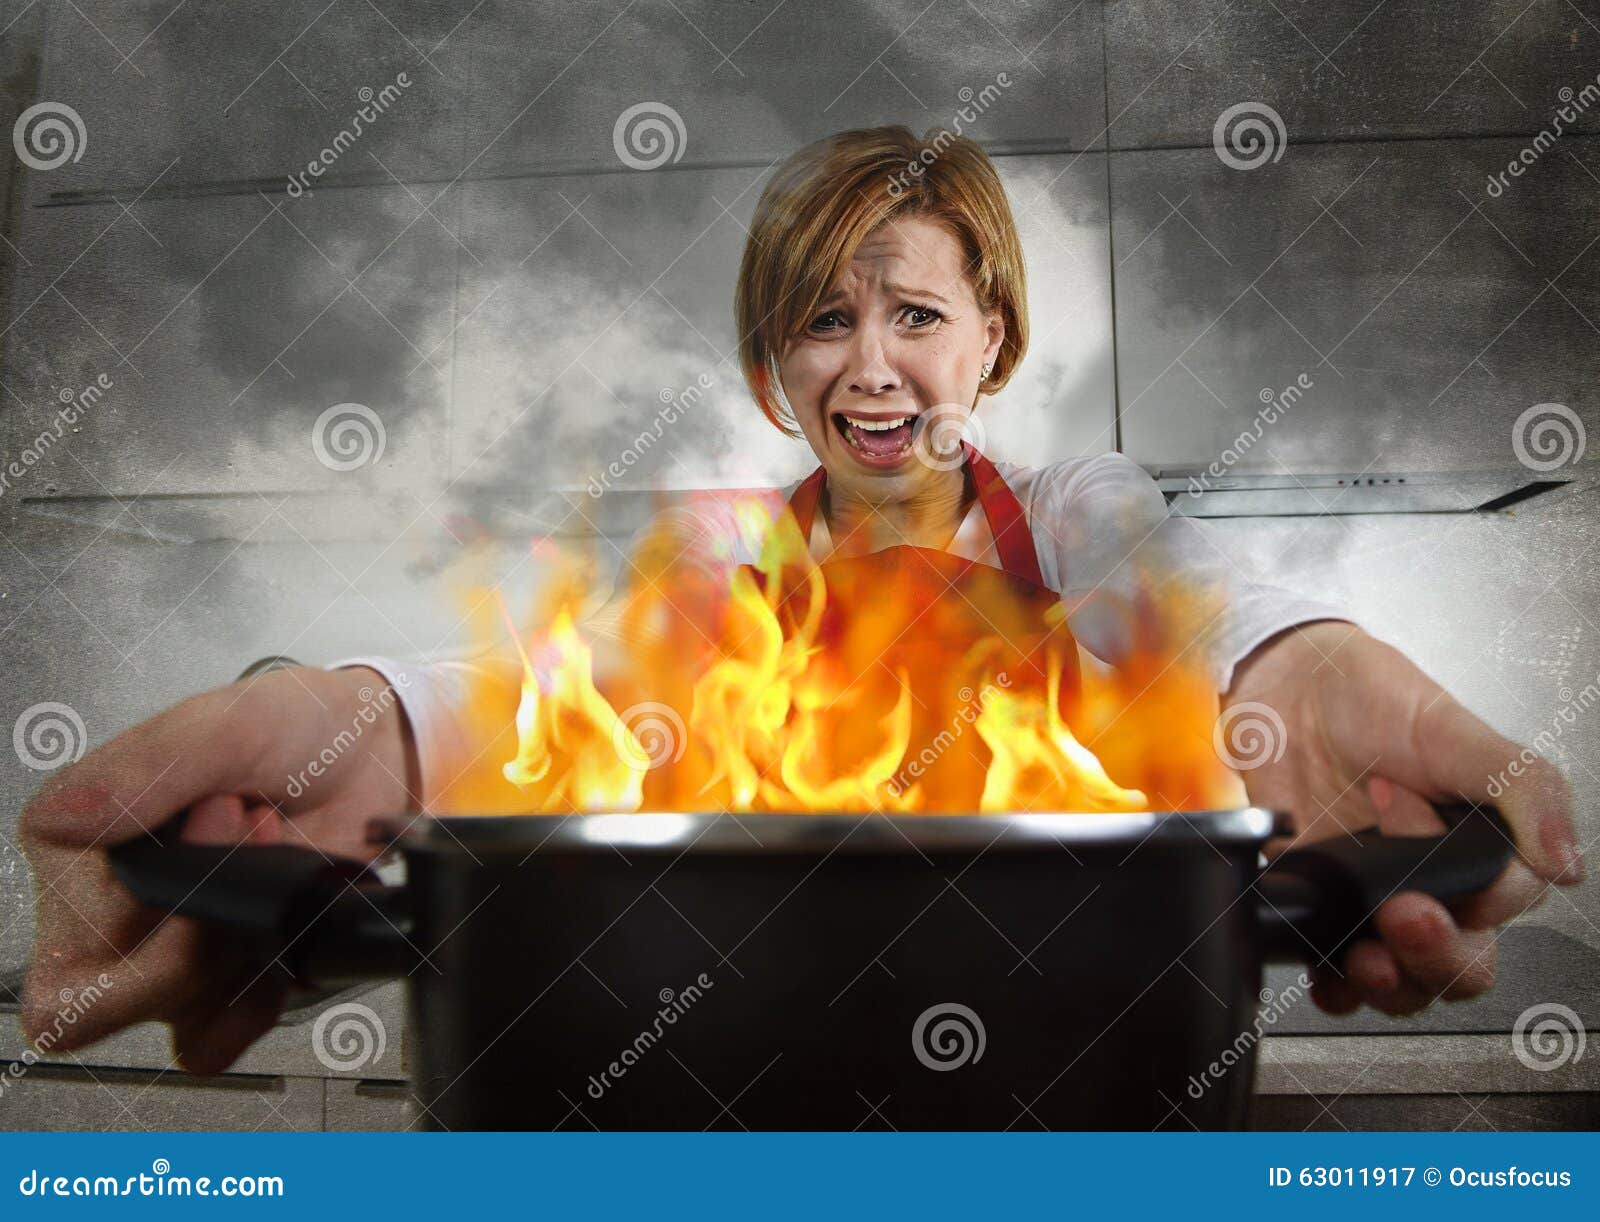 young inexperienced home cook woman in panic with apron holding pot burning in flames with in panic